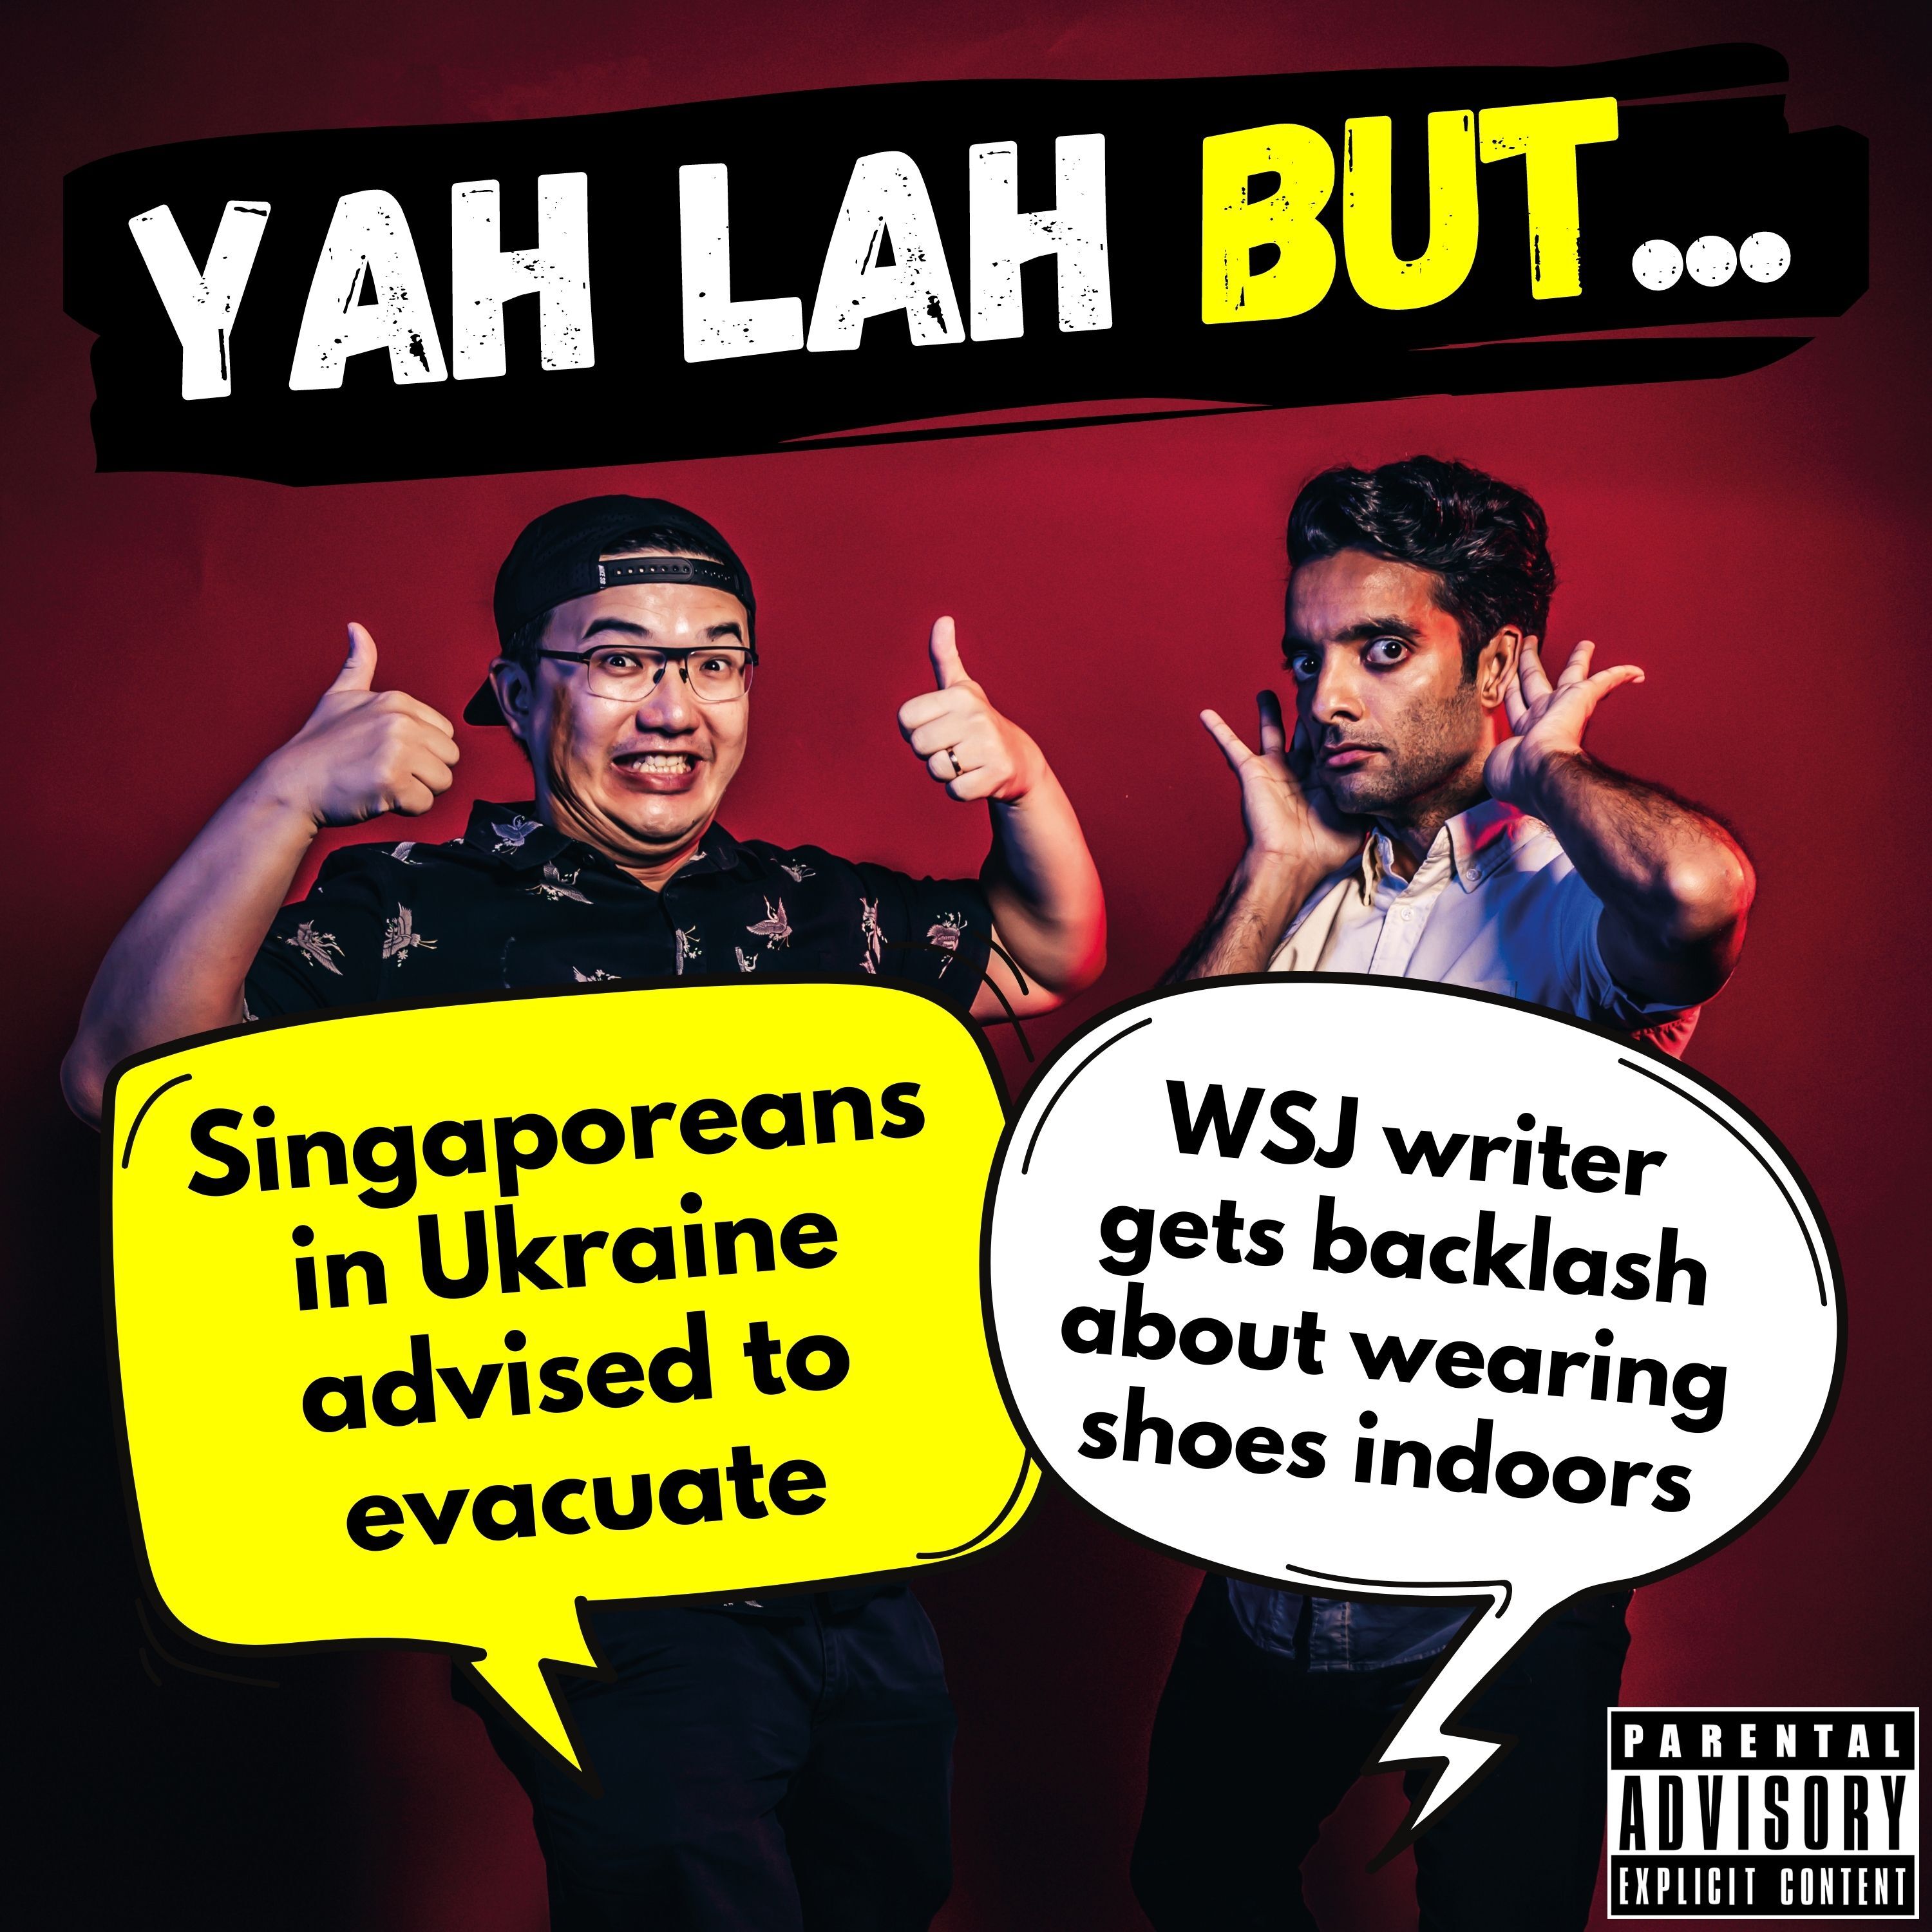 #262 - Singaporeans in Ukraine advised to evacuate & WSJ writer gets backlash about wearing shoes indoors